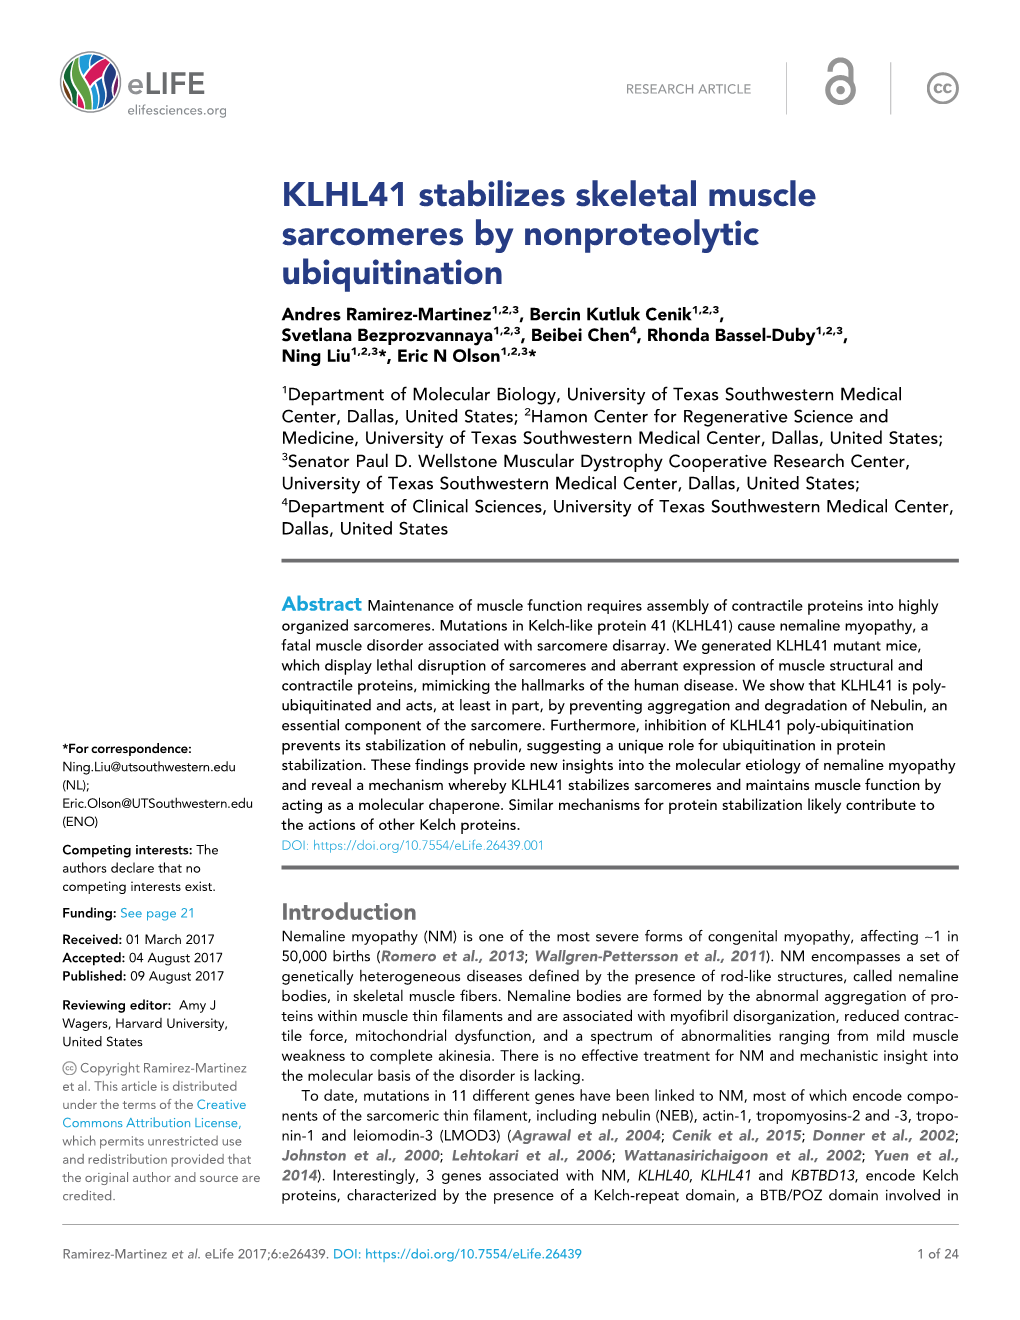 KLHL41 Stabilizes Skeletal Muscle Sarcomeres by Nonproteolytic Ubiquitination